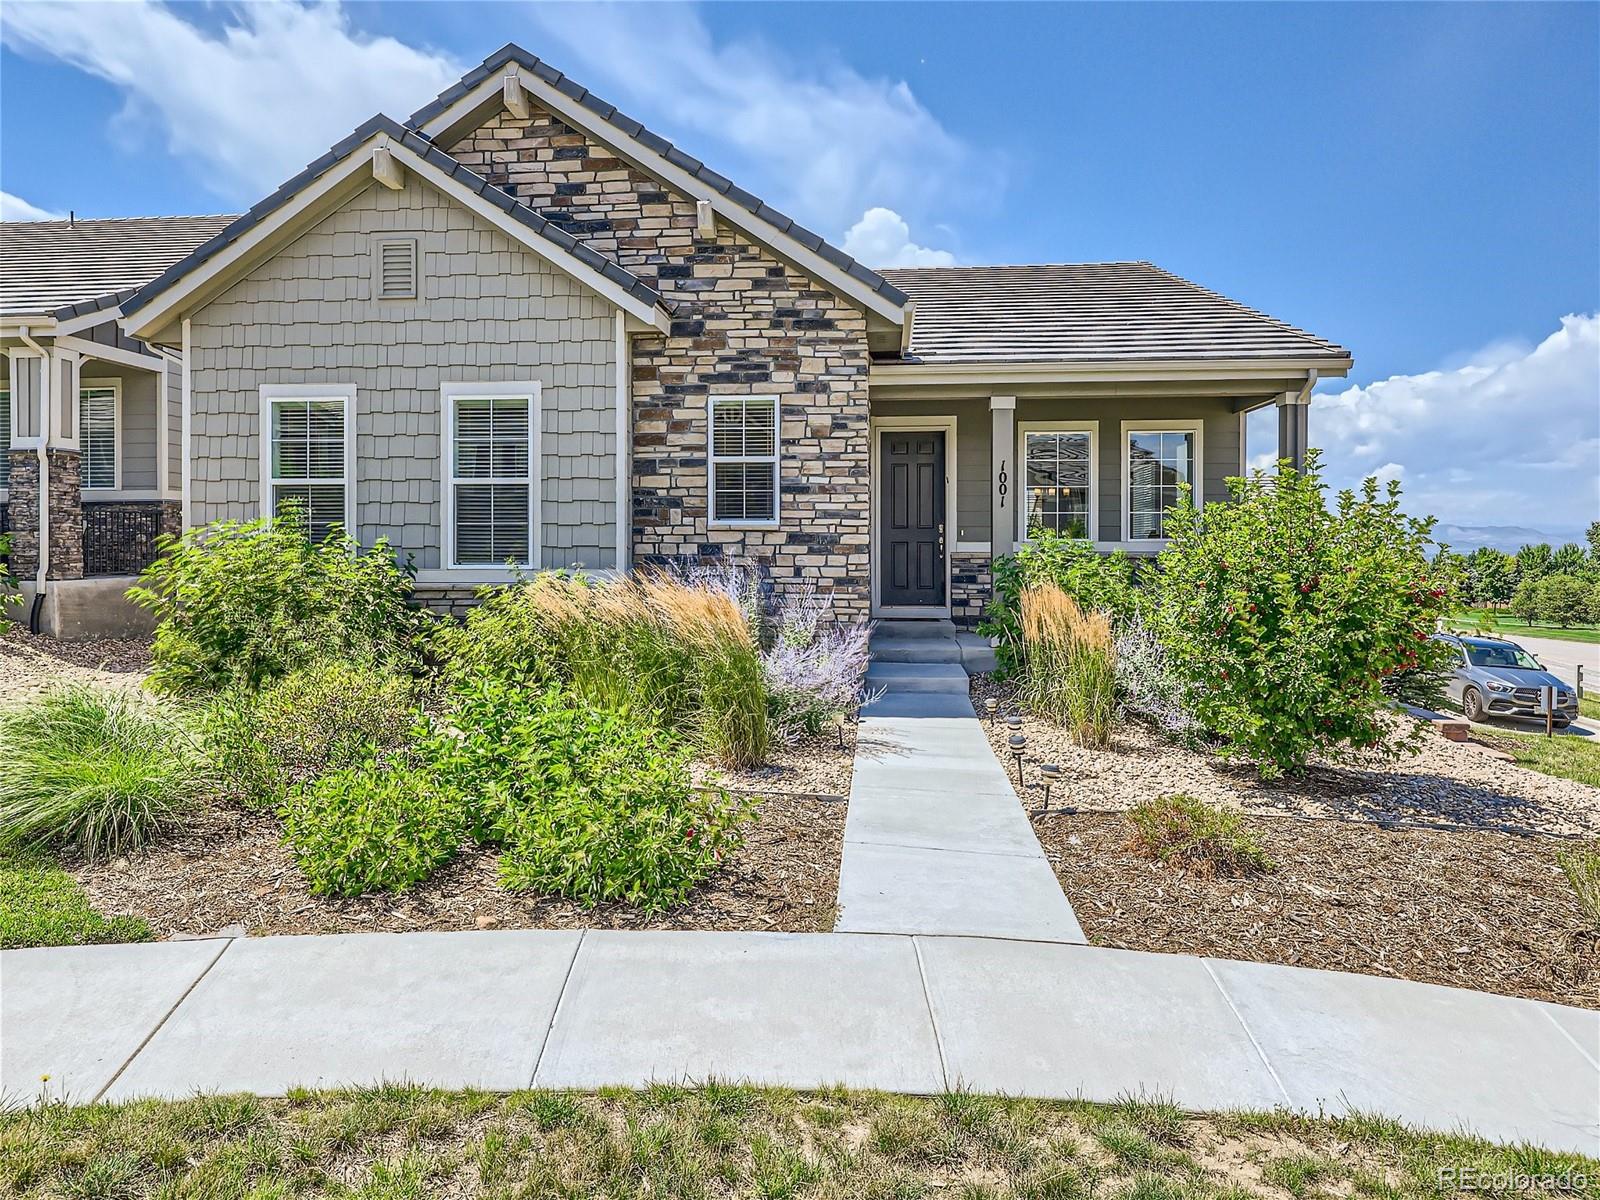 1001  brocade drive, Highlands Ranch sold home. Closed on 2024-03-29 for $825,000.